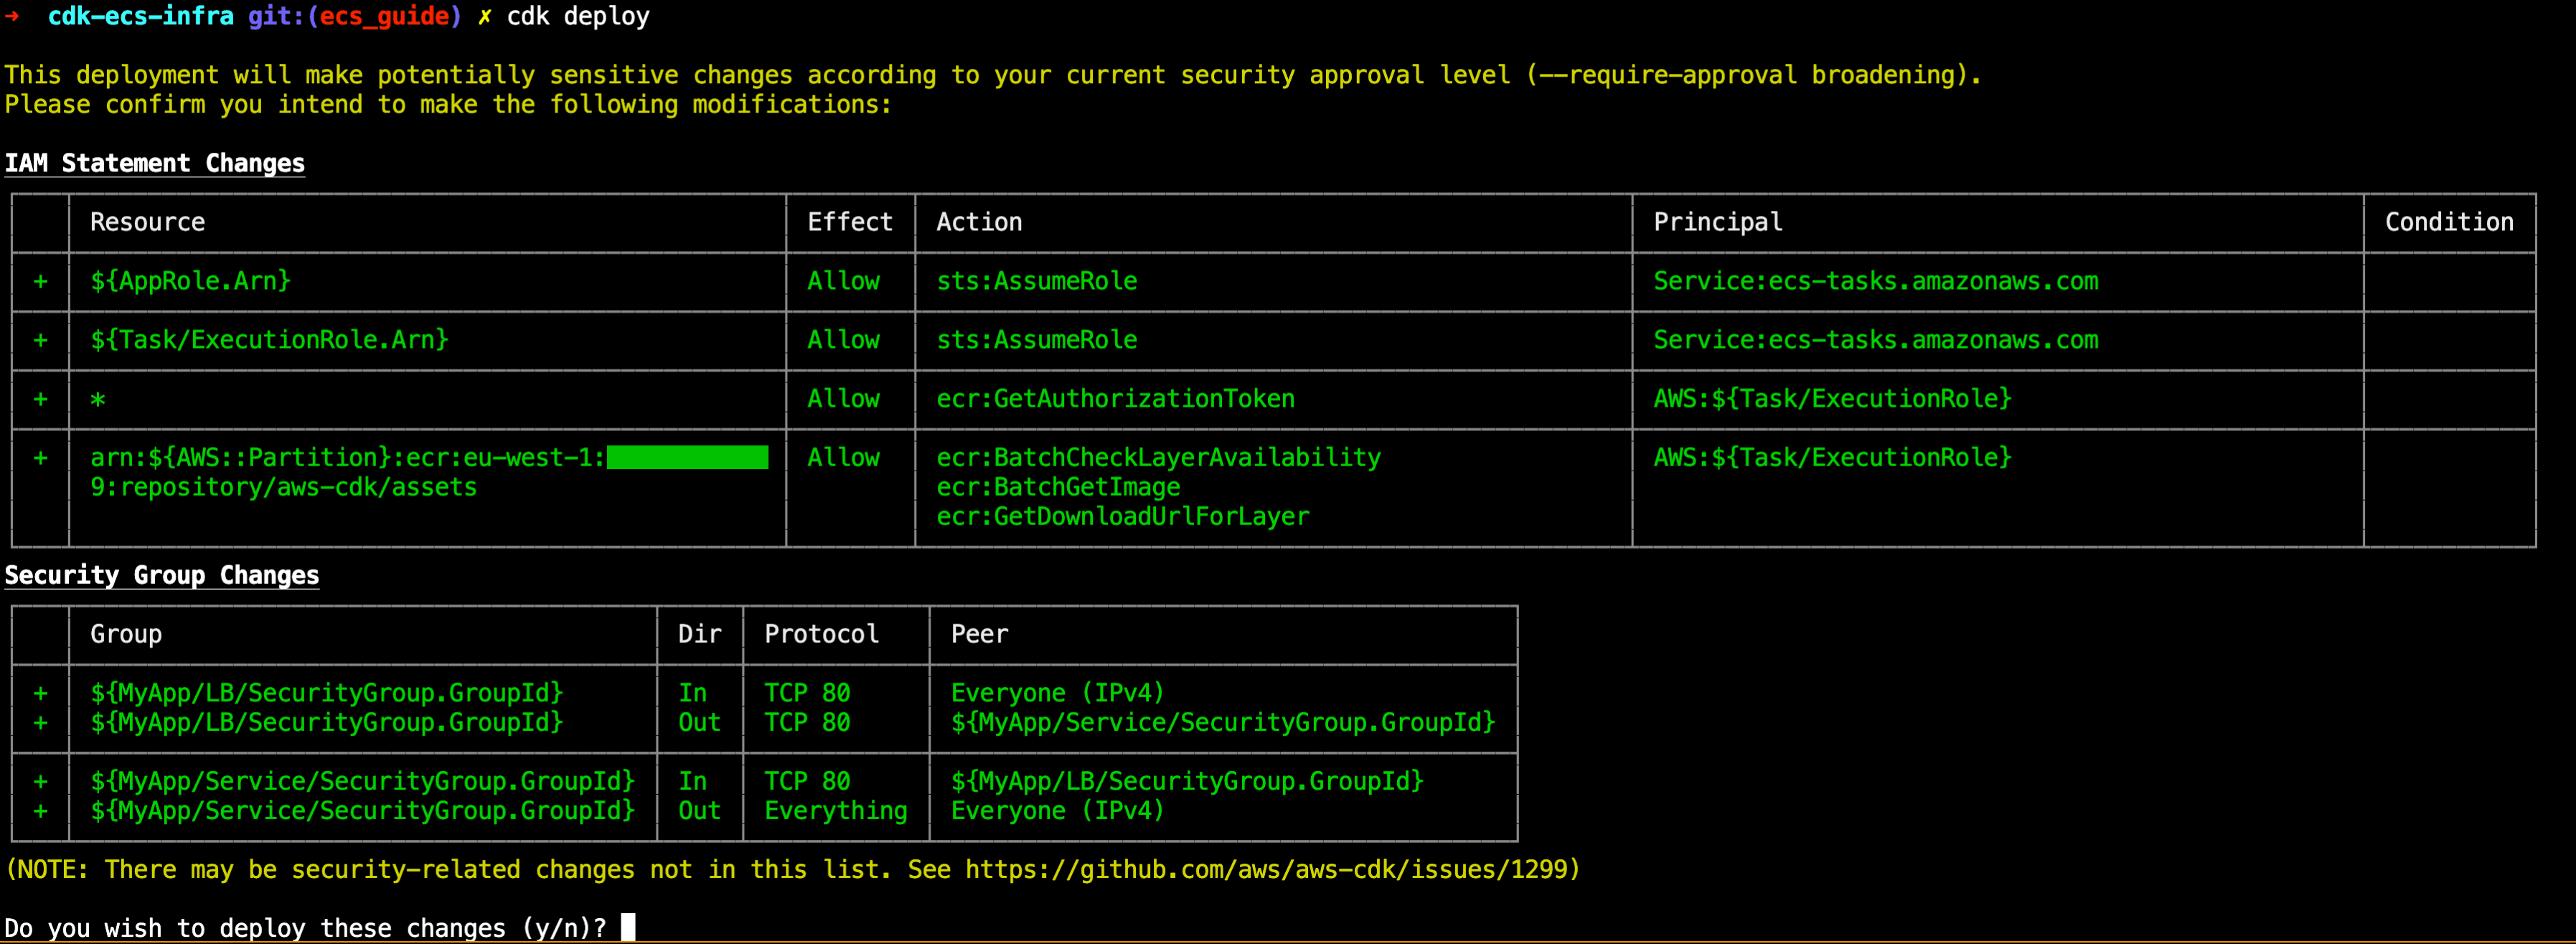 Cdk deployment output showing list of security related changes, and asking approval to proceed